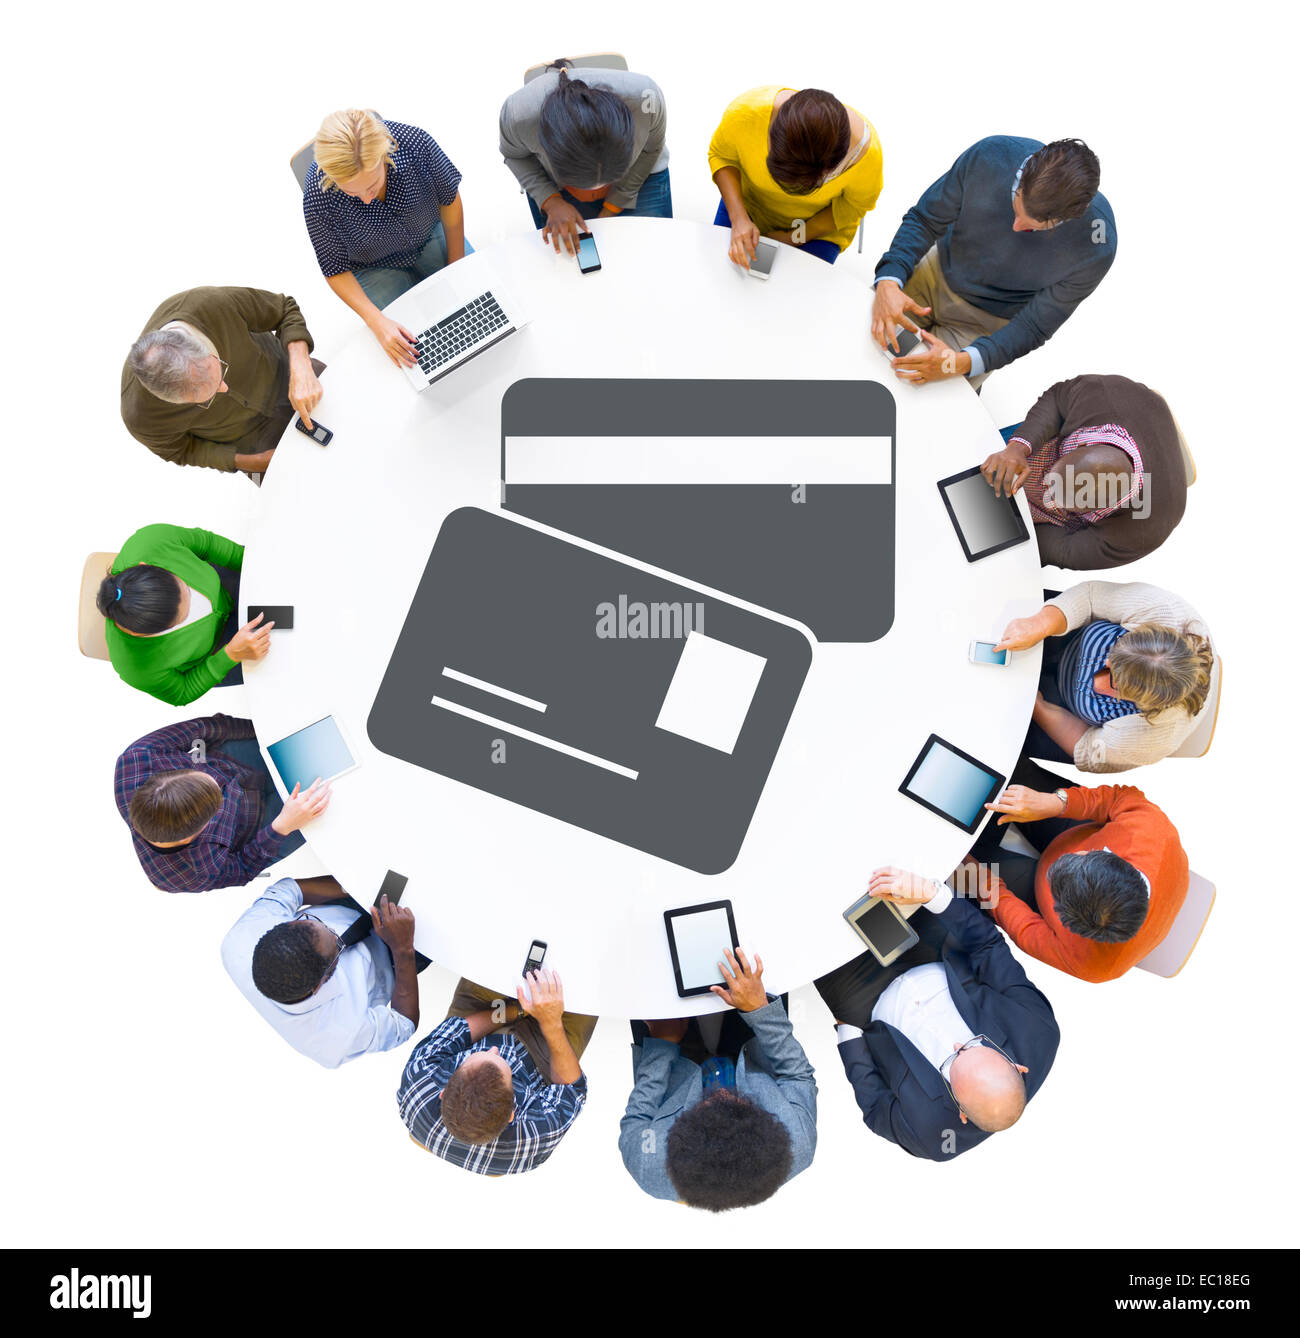 Group of People Using Digital Devices with Credit Card Symbol Stock Photo